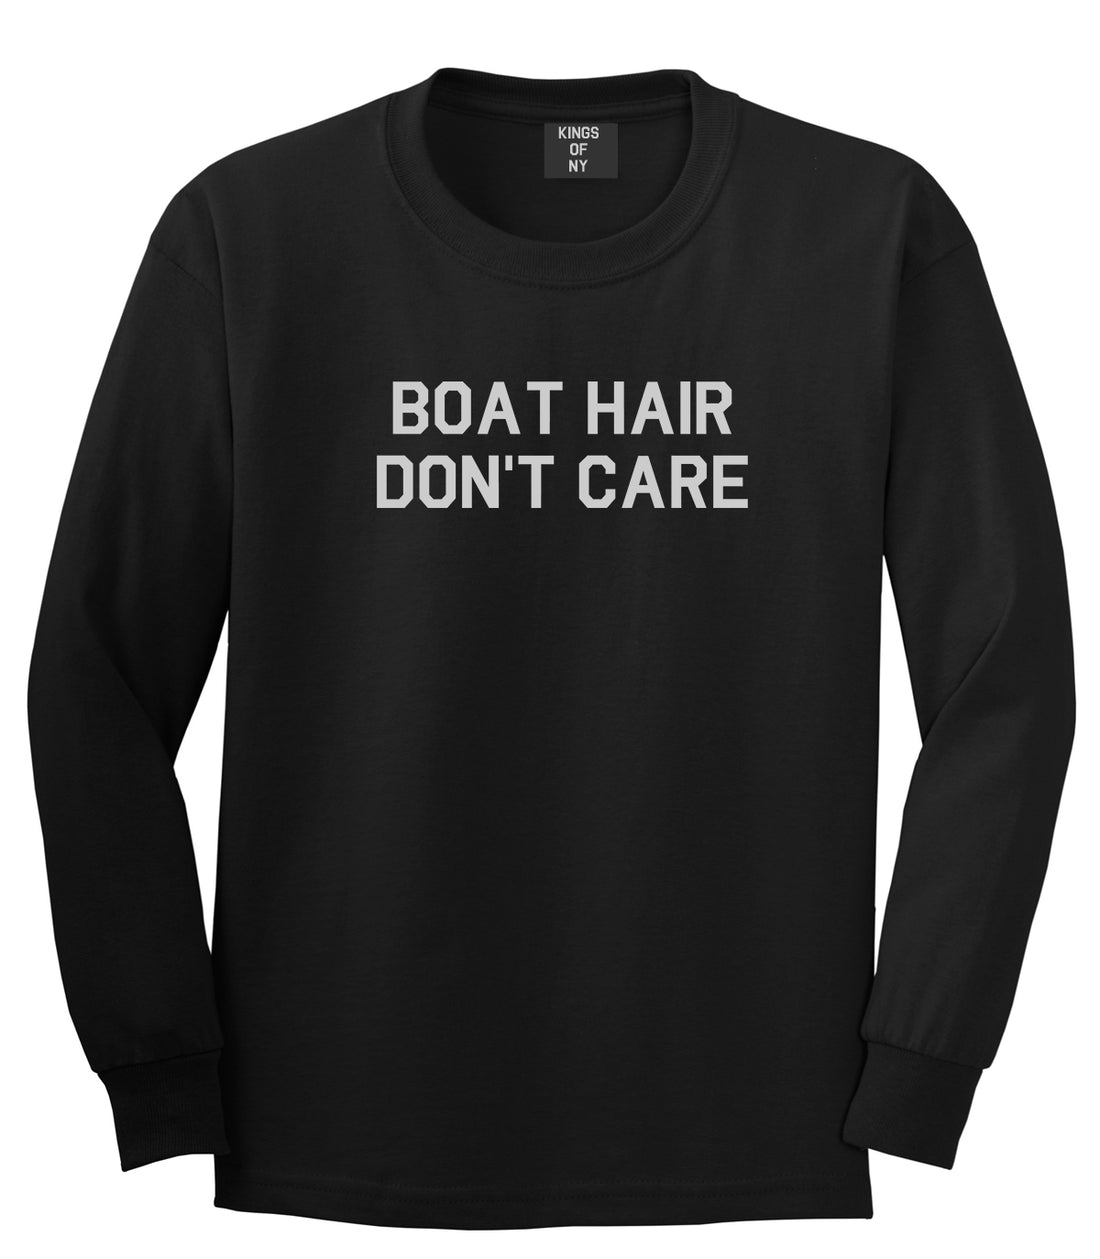 Boat Hair Dont Care Black Long Sleeve T-Shirt by Kings Of NY